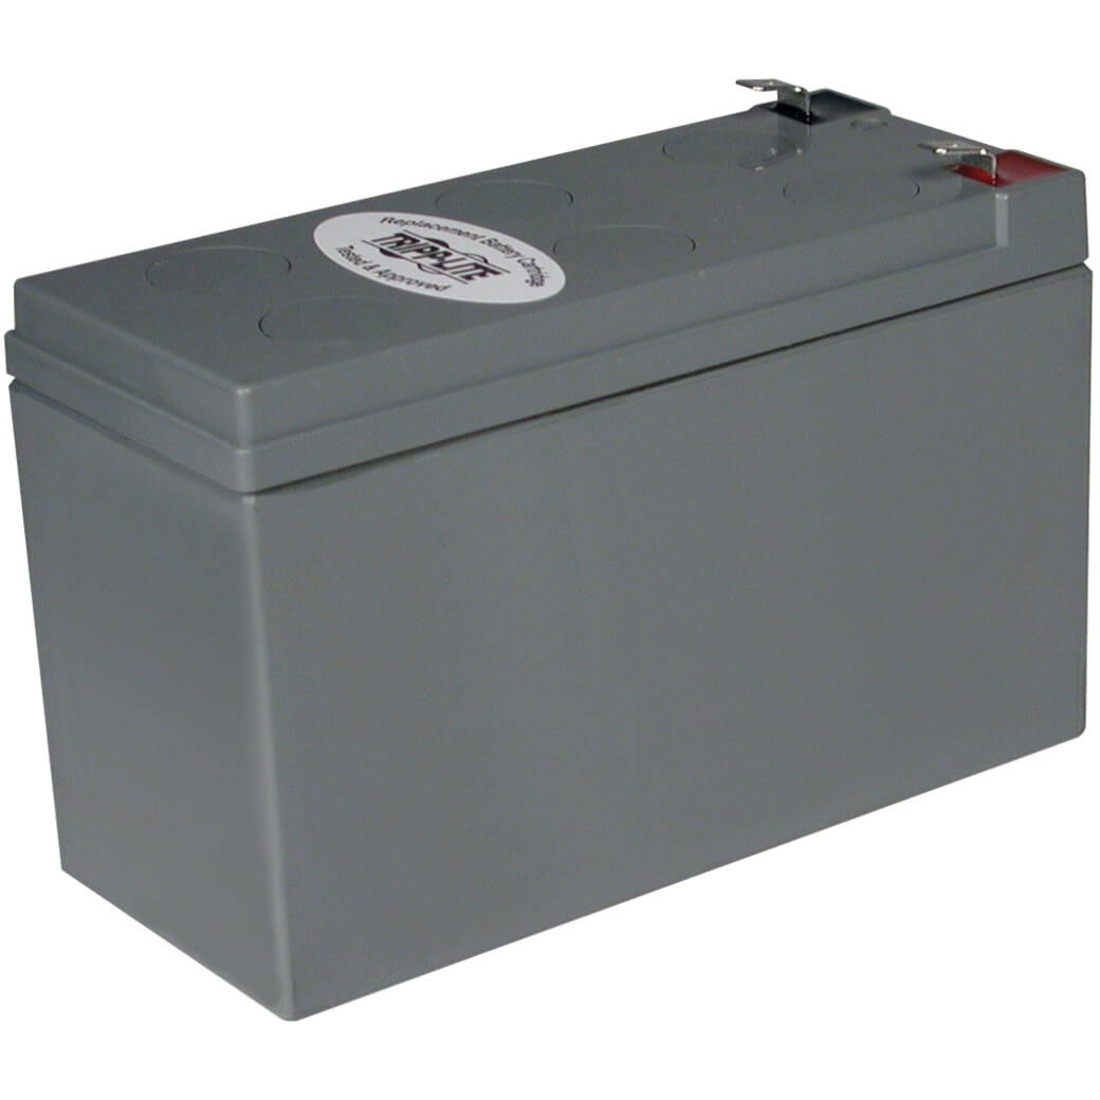 TRIPP LITE RBC51 UPS Replacement Battery Cartridge - image 2 of 2